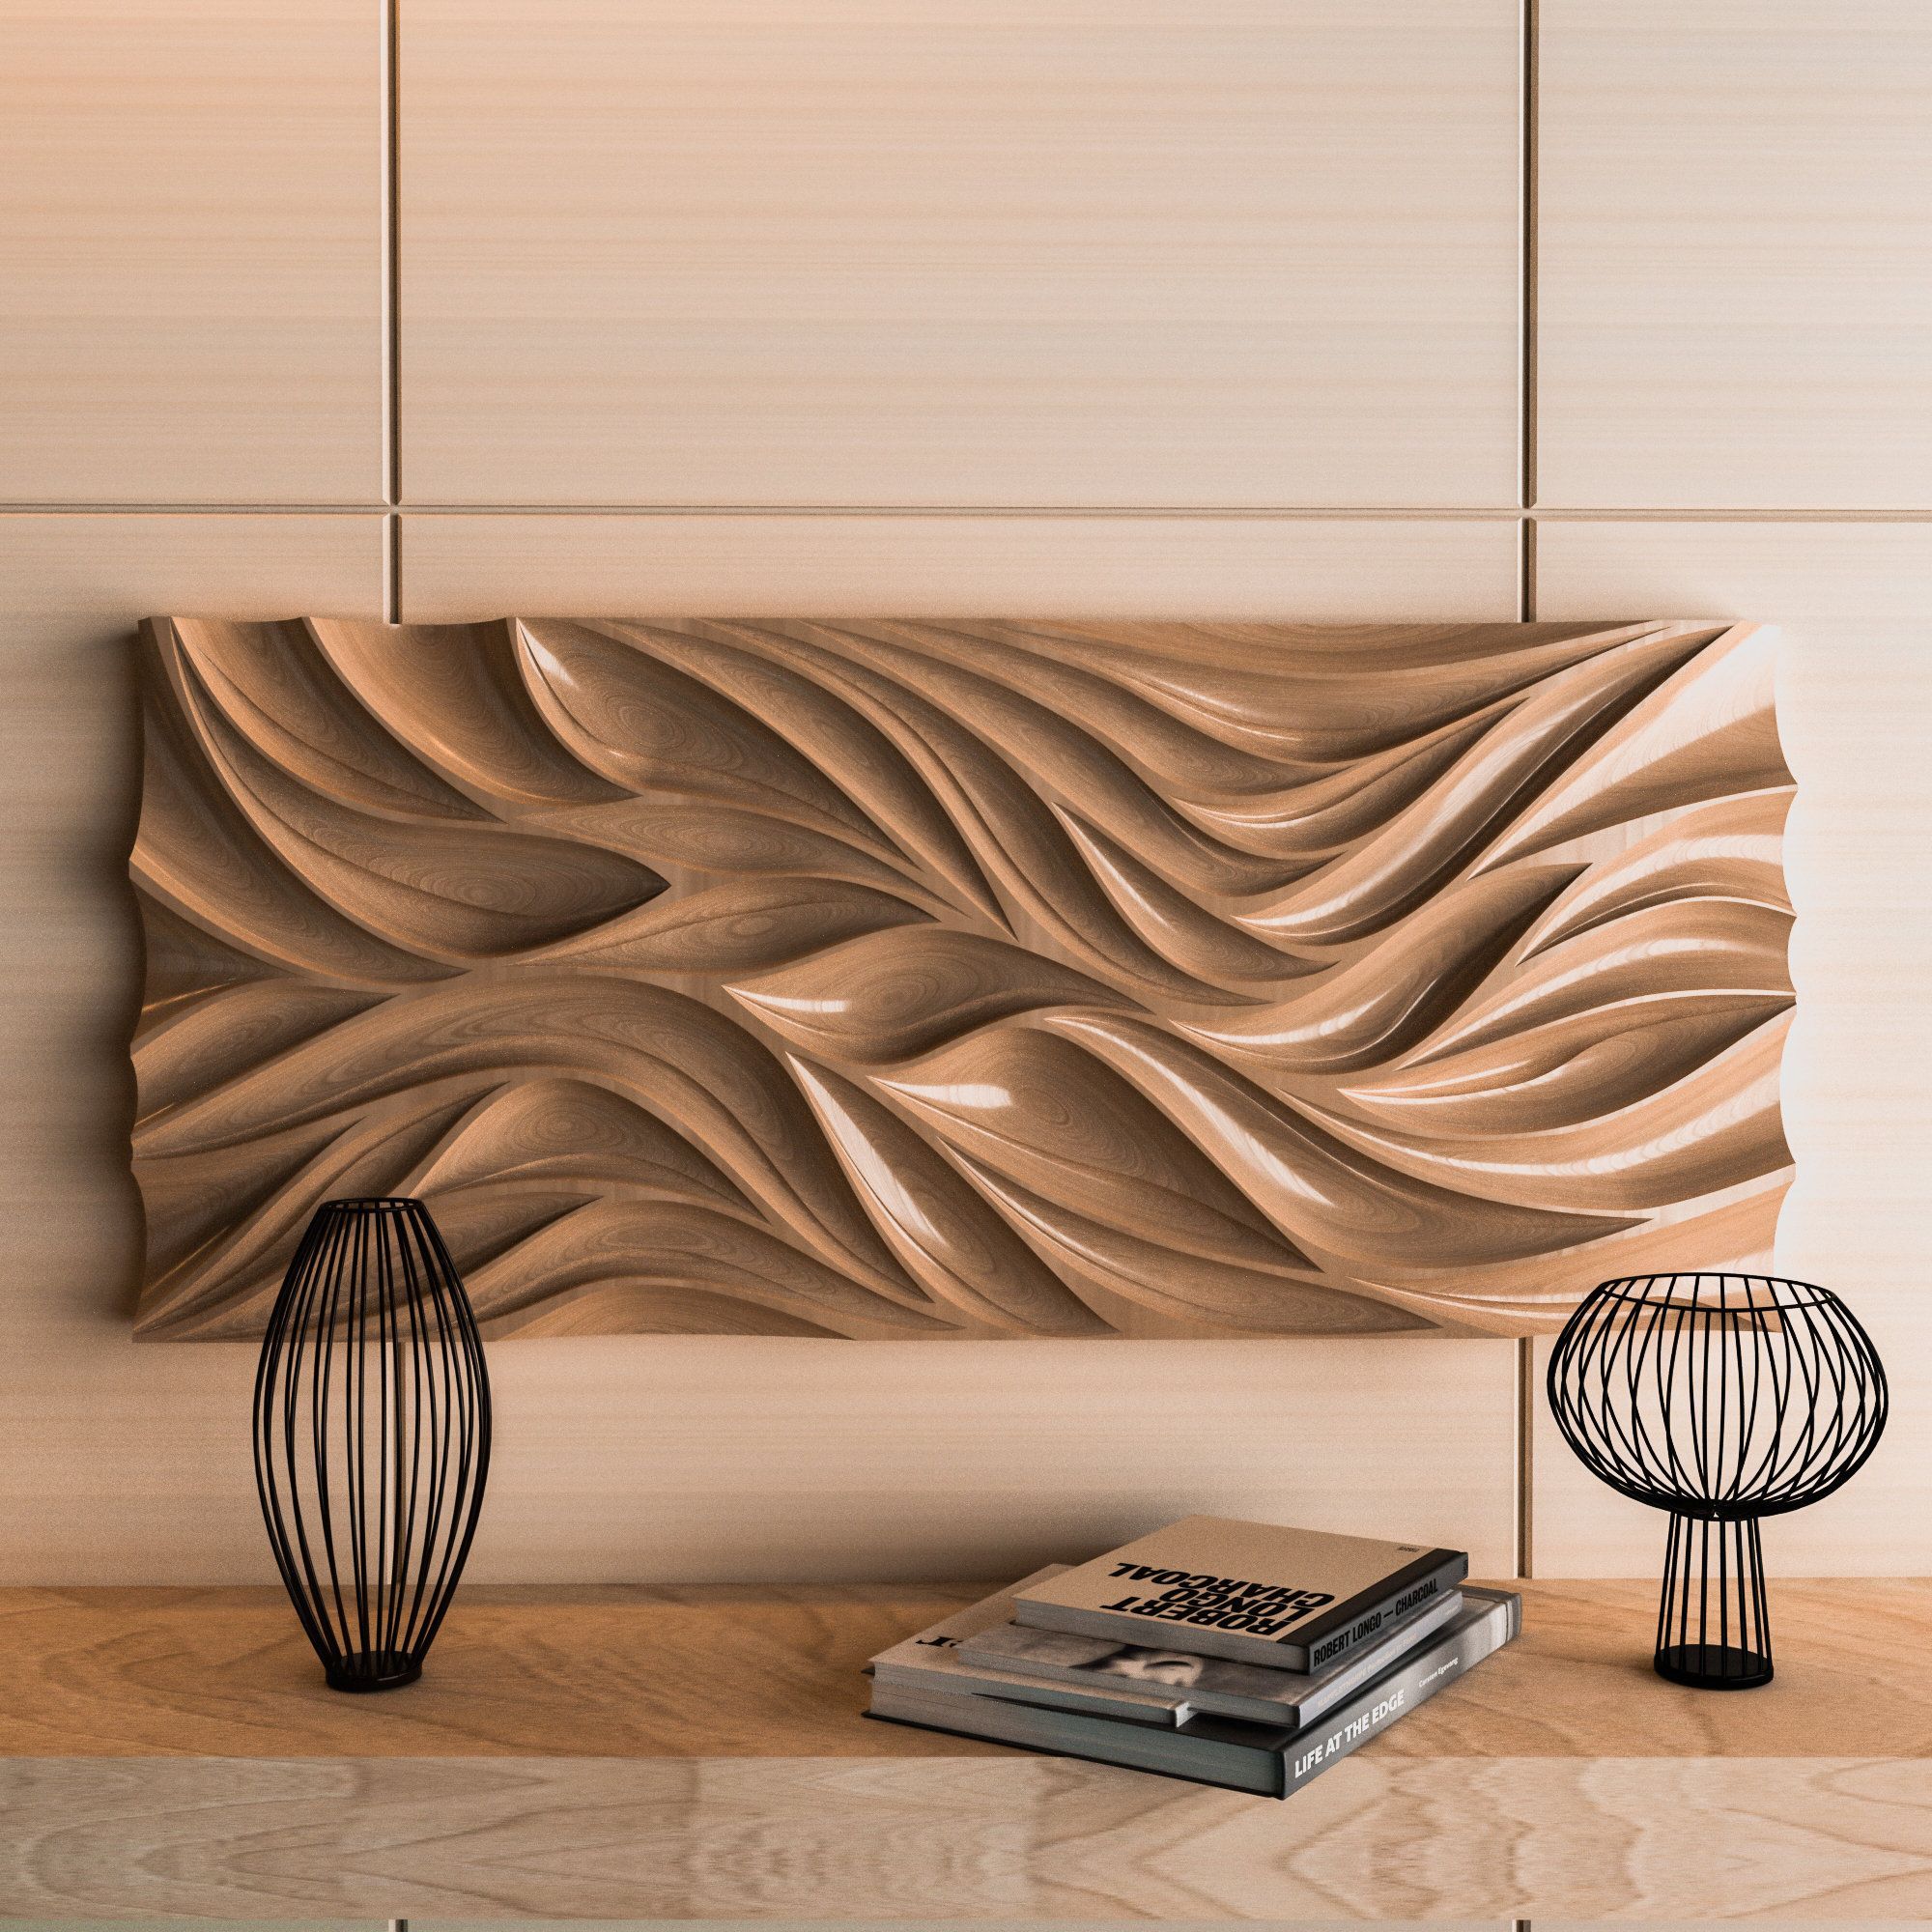 3d Model Of Wall Panels Cnc Panels Cnc Router File 3d Stl For Minimalist Wood Wall Art (View 15 of 15)